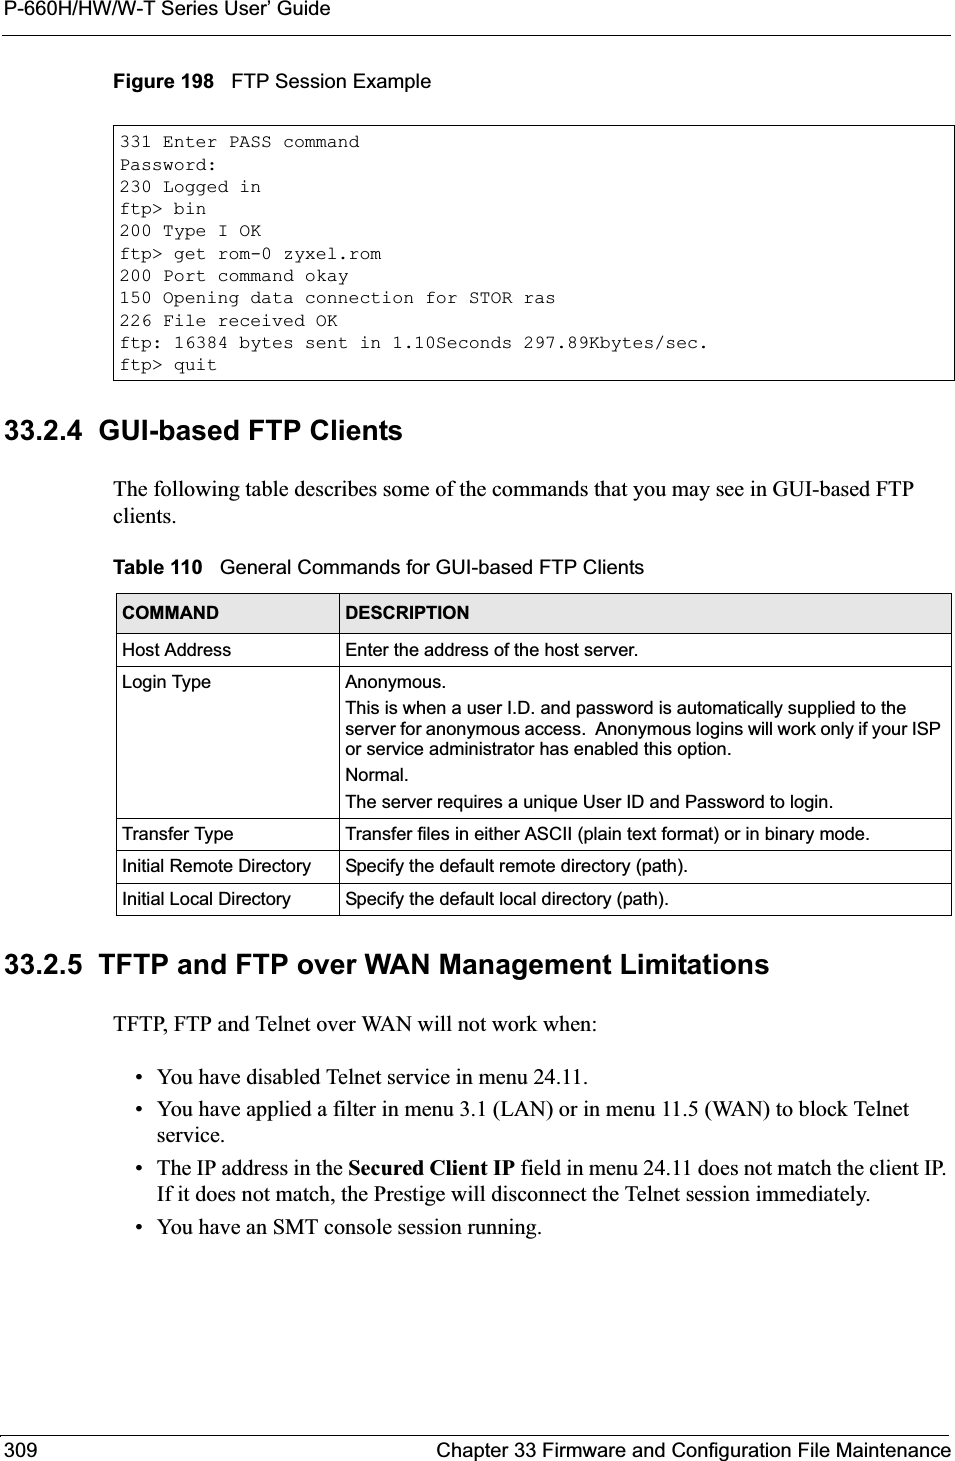 P-660H/HW/W-T Series User’ Guide309 Chapter 33 Firmware and Configuration File MaintenanceFigure 198   FTP Session Example33.2.4  GUI-based FTP ClientsThe following table describes some of the commands that you may see in GUI-based FTP clients.33.2.5  TFTP and FTP over WAN Management LimitationsTFTP, FTP and Telnet over WAN will not work when:• You have disabled Telnet service in menu 24.11.• You have applied a filter in menu 3.1 (LAN) or in menu 11.5 (WAN) to block Telnet service.• The IP address in the Secured Client IP field in menu 24.11 does not match the client IP. If it does not match, the Prestige will disconnect the Telnet session immediately.• You have an SMT console session running.331 Enter PASS commandPassword:230 Logged inftp&gt; bin200 Type I OKftp&gt; get rom-0 zyxel.rom200 Port command okay150 Opening data connection for STOR ras226 File received OKftp: 16384 bytes sent in 1.10Seconds 297.89Kbytes/sec.ftp&gt; quitTable 110   General Commands for GUI-based FTP ClientsCOMMAND DESCRIPTIONHost Address Enter the address of the host server.Login Type Anonymous.This is when a user I.D. and password is automatically supplied to the server for anonymous access.  Anonymous logins will work only if your ISP or service administrator has enabled this option.Normal.The server requires a unique User ID and Password to login.Transfer Type Transfer files in either ASCII (plain text format) or in binary mode.Initial Remote Directory Specify the default remote directory (path).Initial Local Directory Specify the default local directory (path).